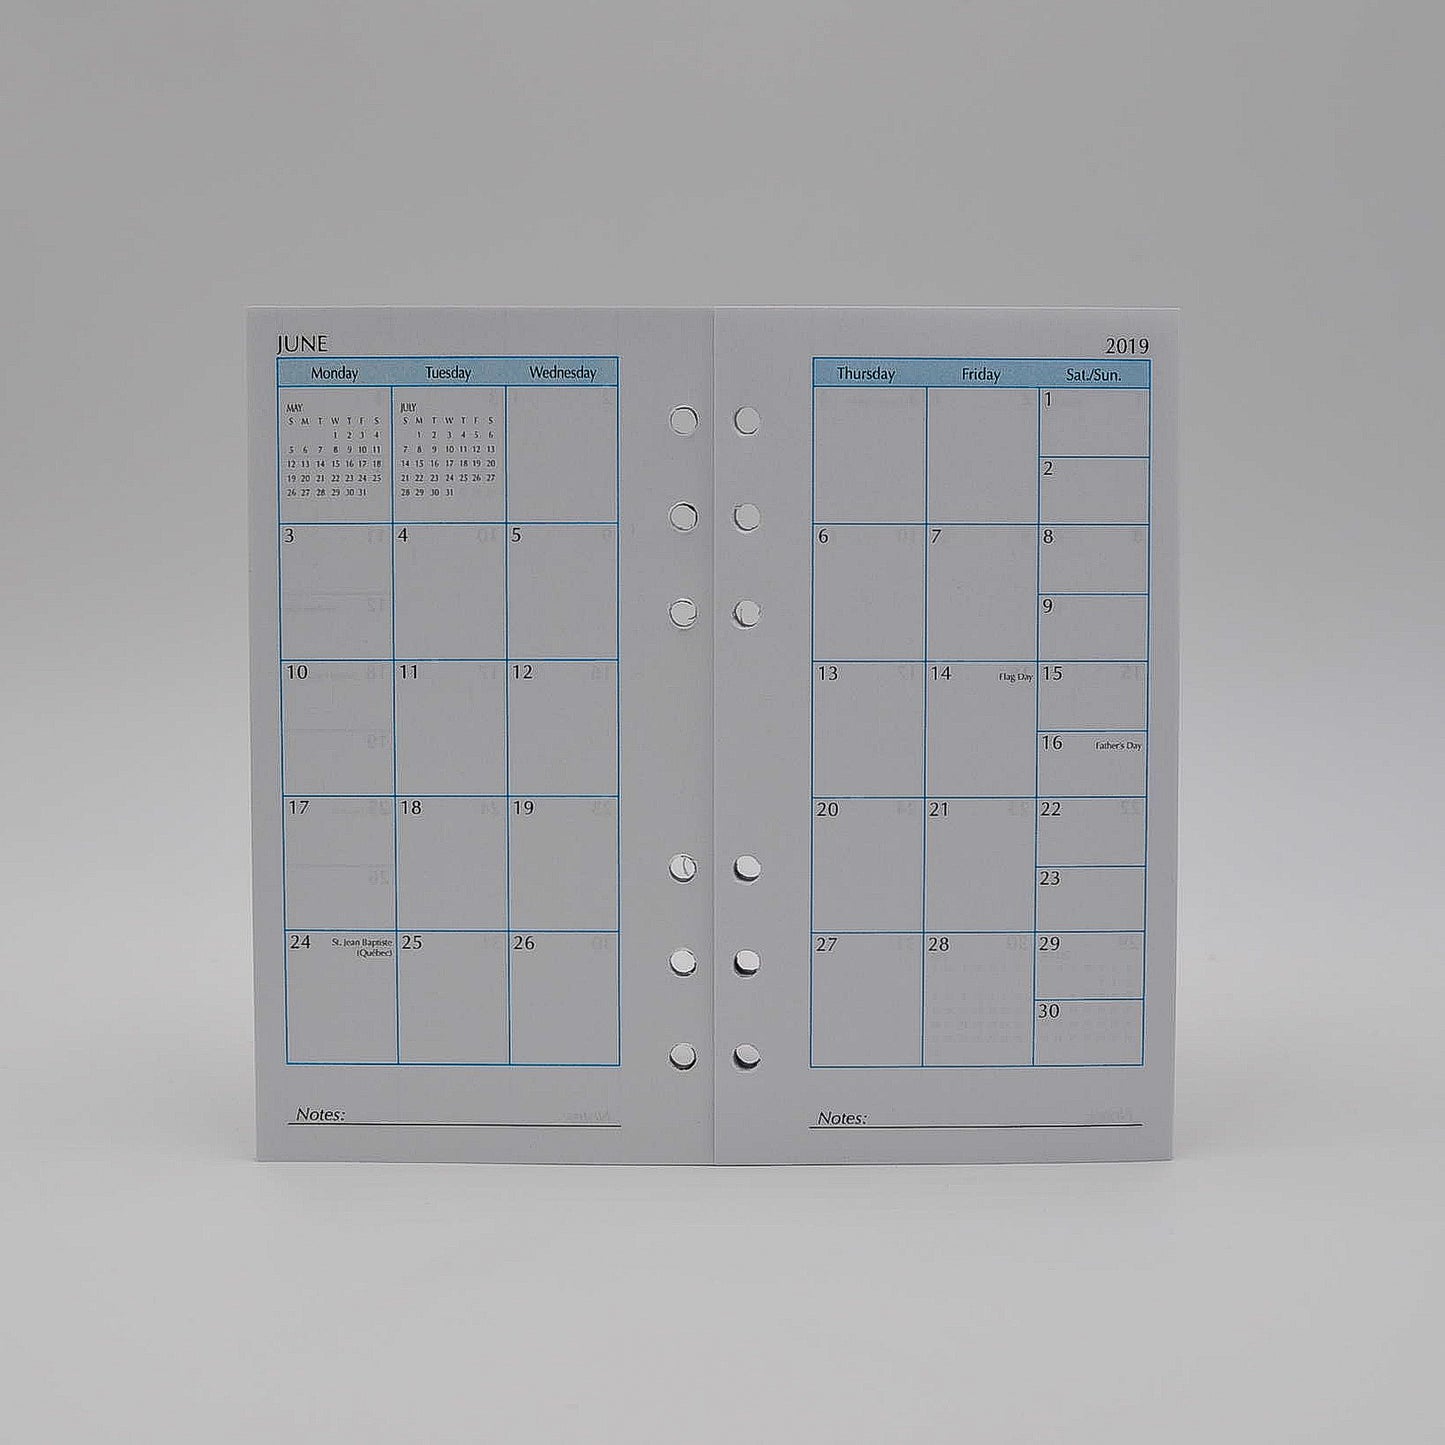 2022 Calendar Refill MP46P6 McCarthy Collection: MP46P6 6-3/4" X 3-3/4" 6-Ring Planner 6-HOLE PLANNER WHITE MONTHLY WEEKLY CALENDAR LOOSE LEAF planning diary loose leaf louis vuitton agenda refill calendar MP46P6 McCarthy Collection: MP46P6 6-3/4" X 3-3/4" 6-Ring Planner 6-HOLE PLANNER WHITE MONTHLY WEEKLY CALENDAR LOOSE LEAF planning diary loose leaf louis vuitton agenda refill calendar